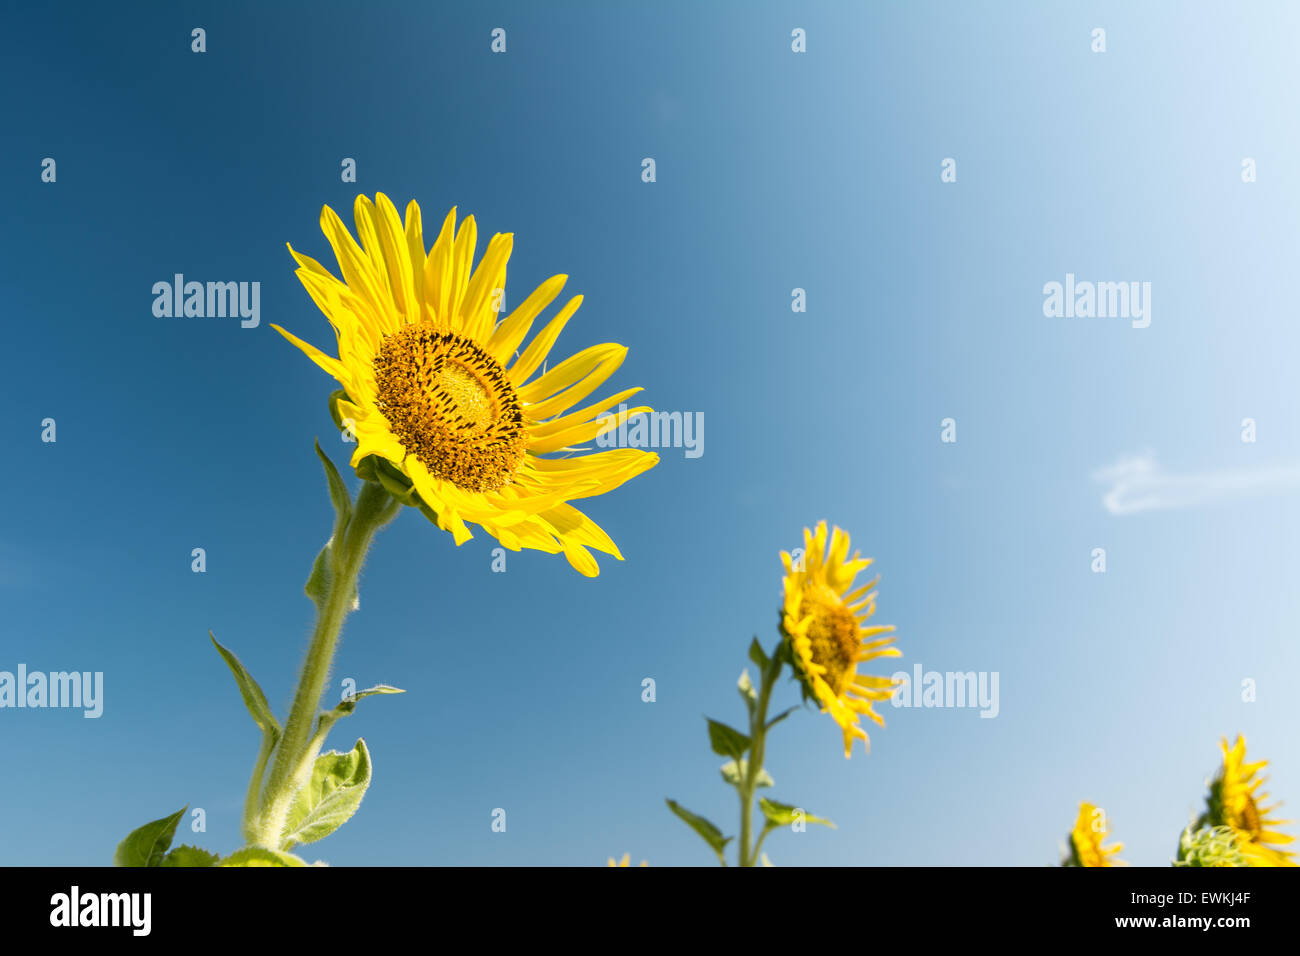 Beautiful landscape with sunflower field over blue sky Stock Photo